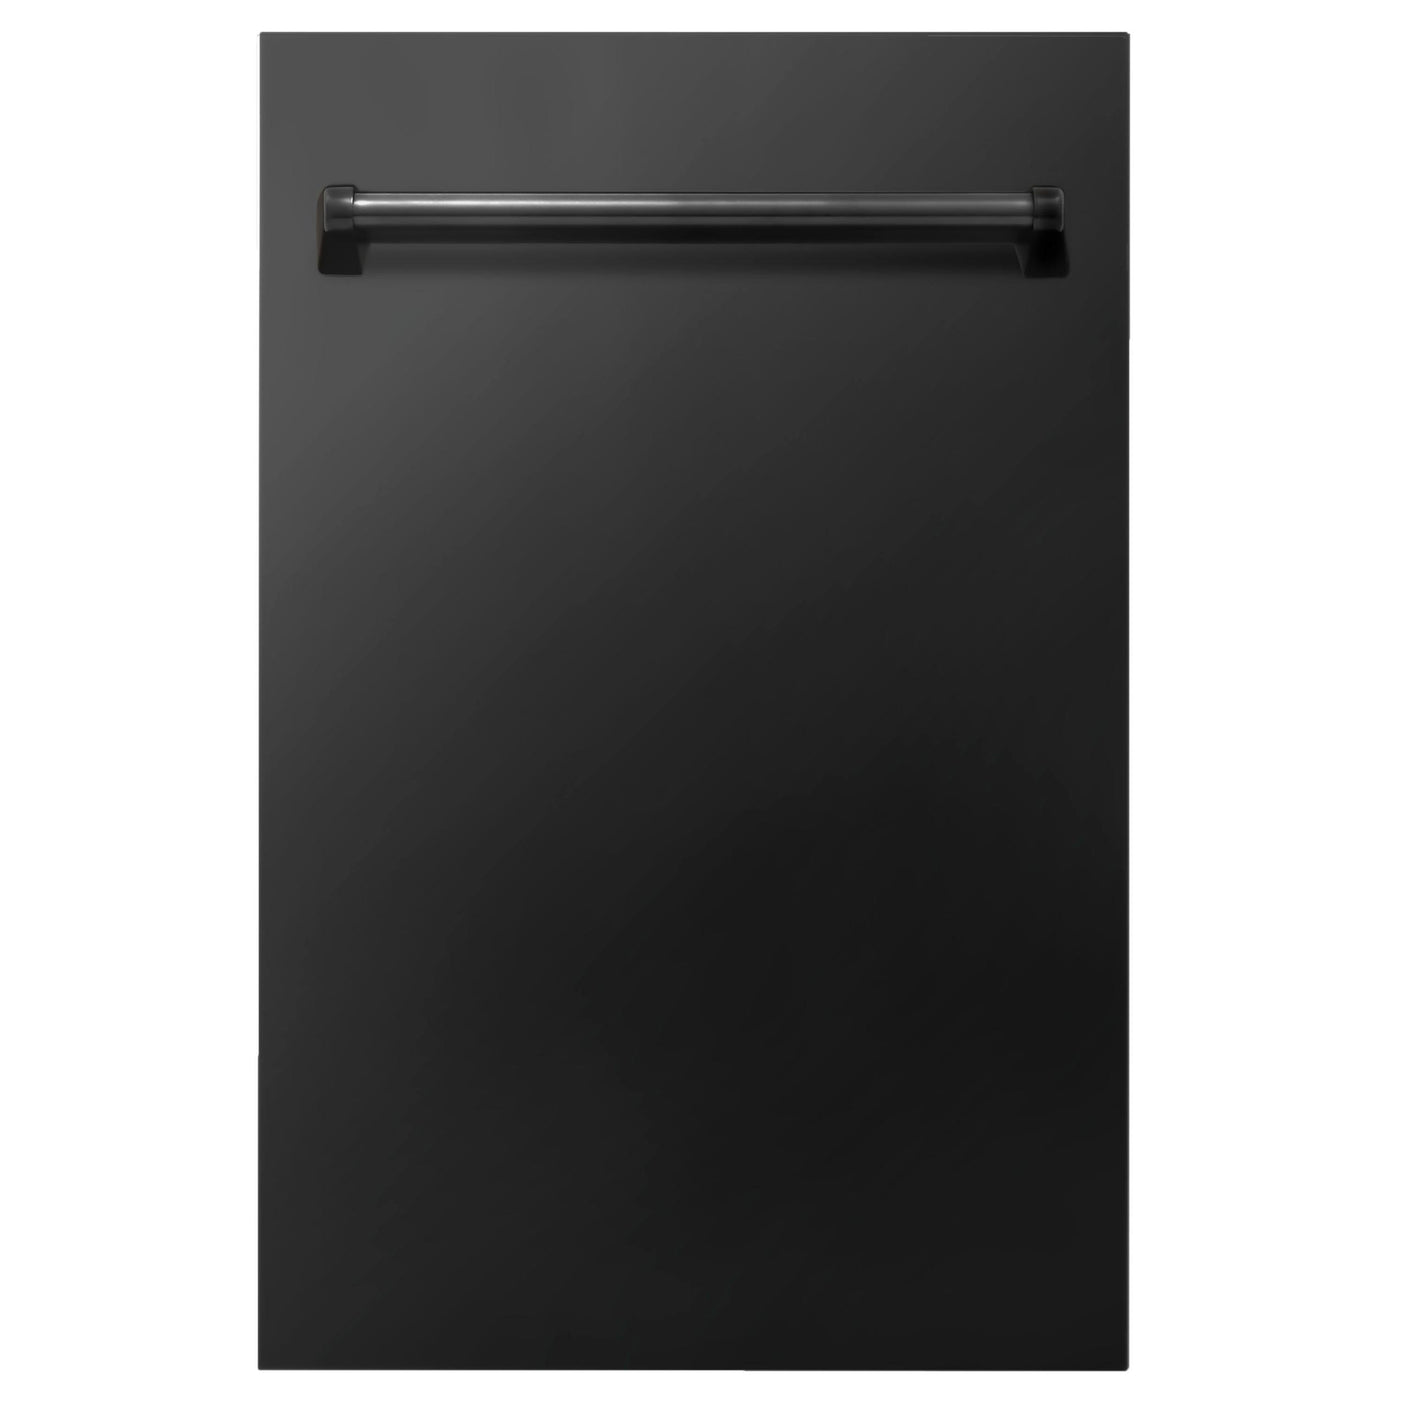 ZLINE 18 in. Compact Top Control Dishwasher with Stainless Steel Tub and Traditional Handle, 52dBa (DW-18) [Color: Black Stainless Steel]